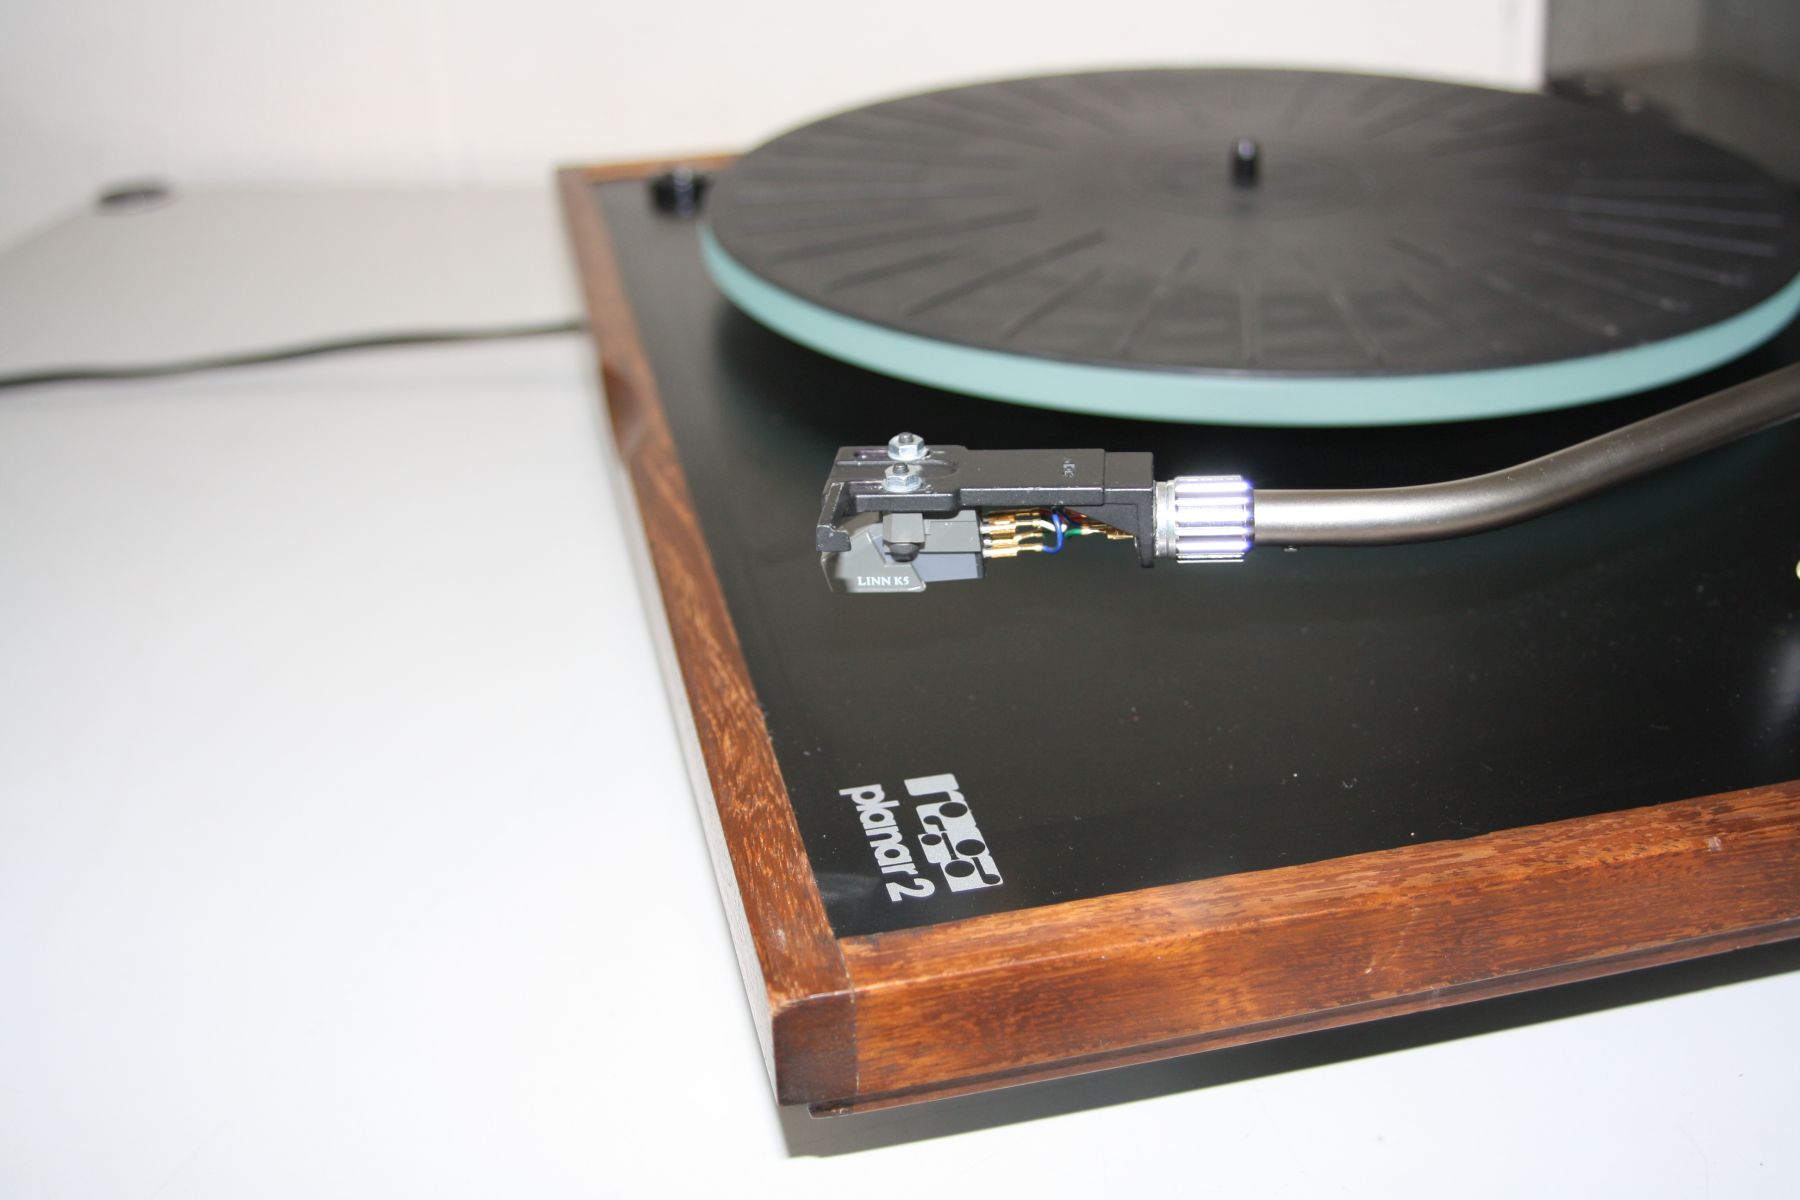 A REGA PLANER 2 TURNTABLE with a smoked perspex lid, a walnut plinth and a Linn K5 cartridge - Image 2 of 3